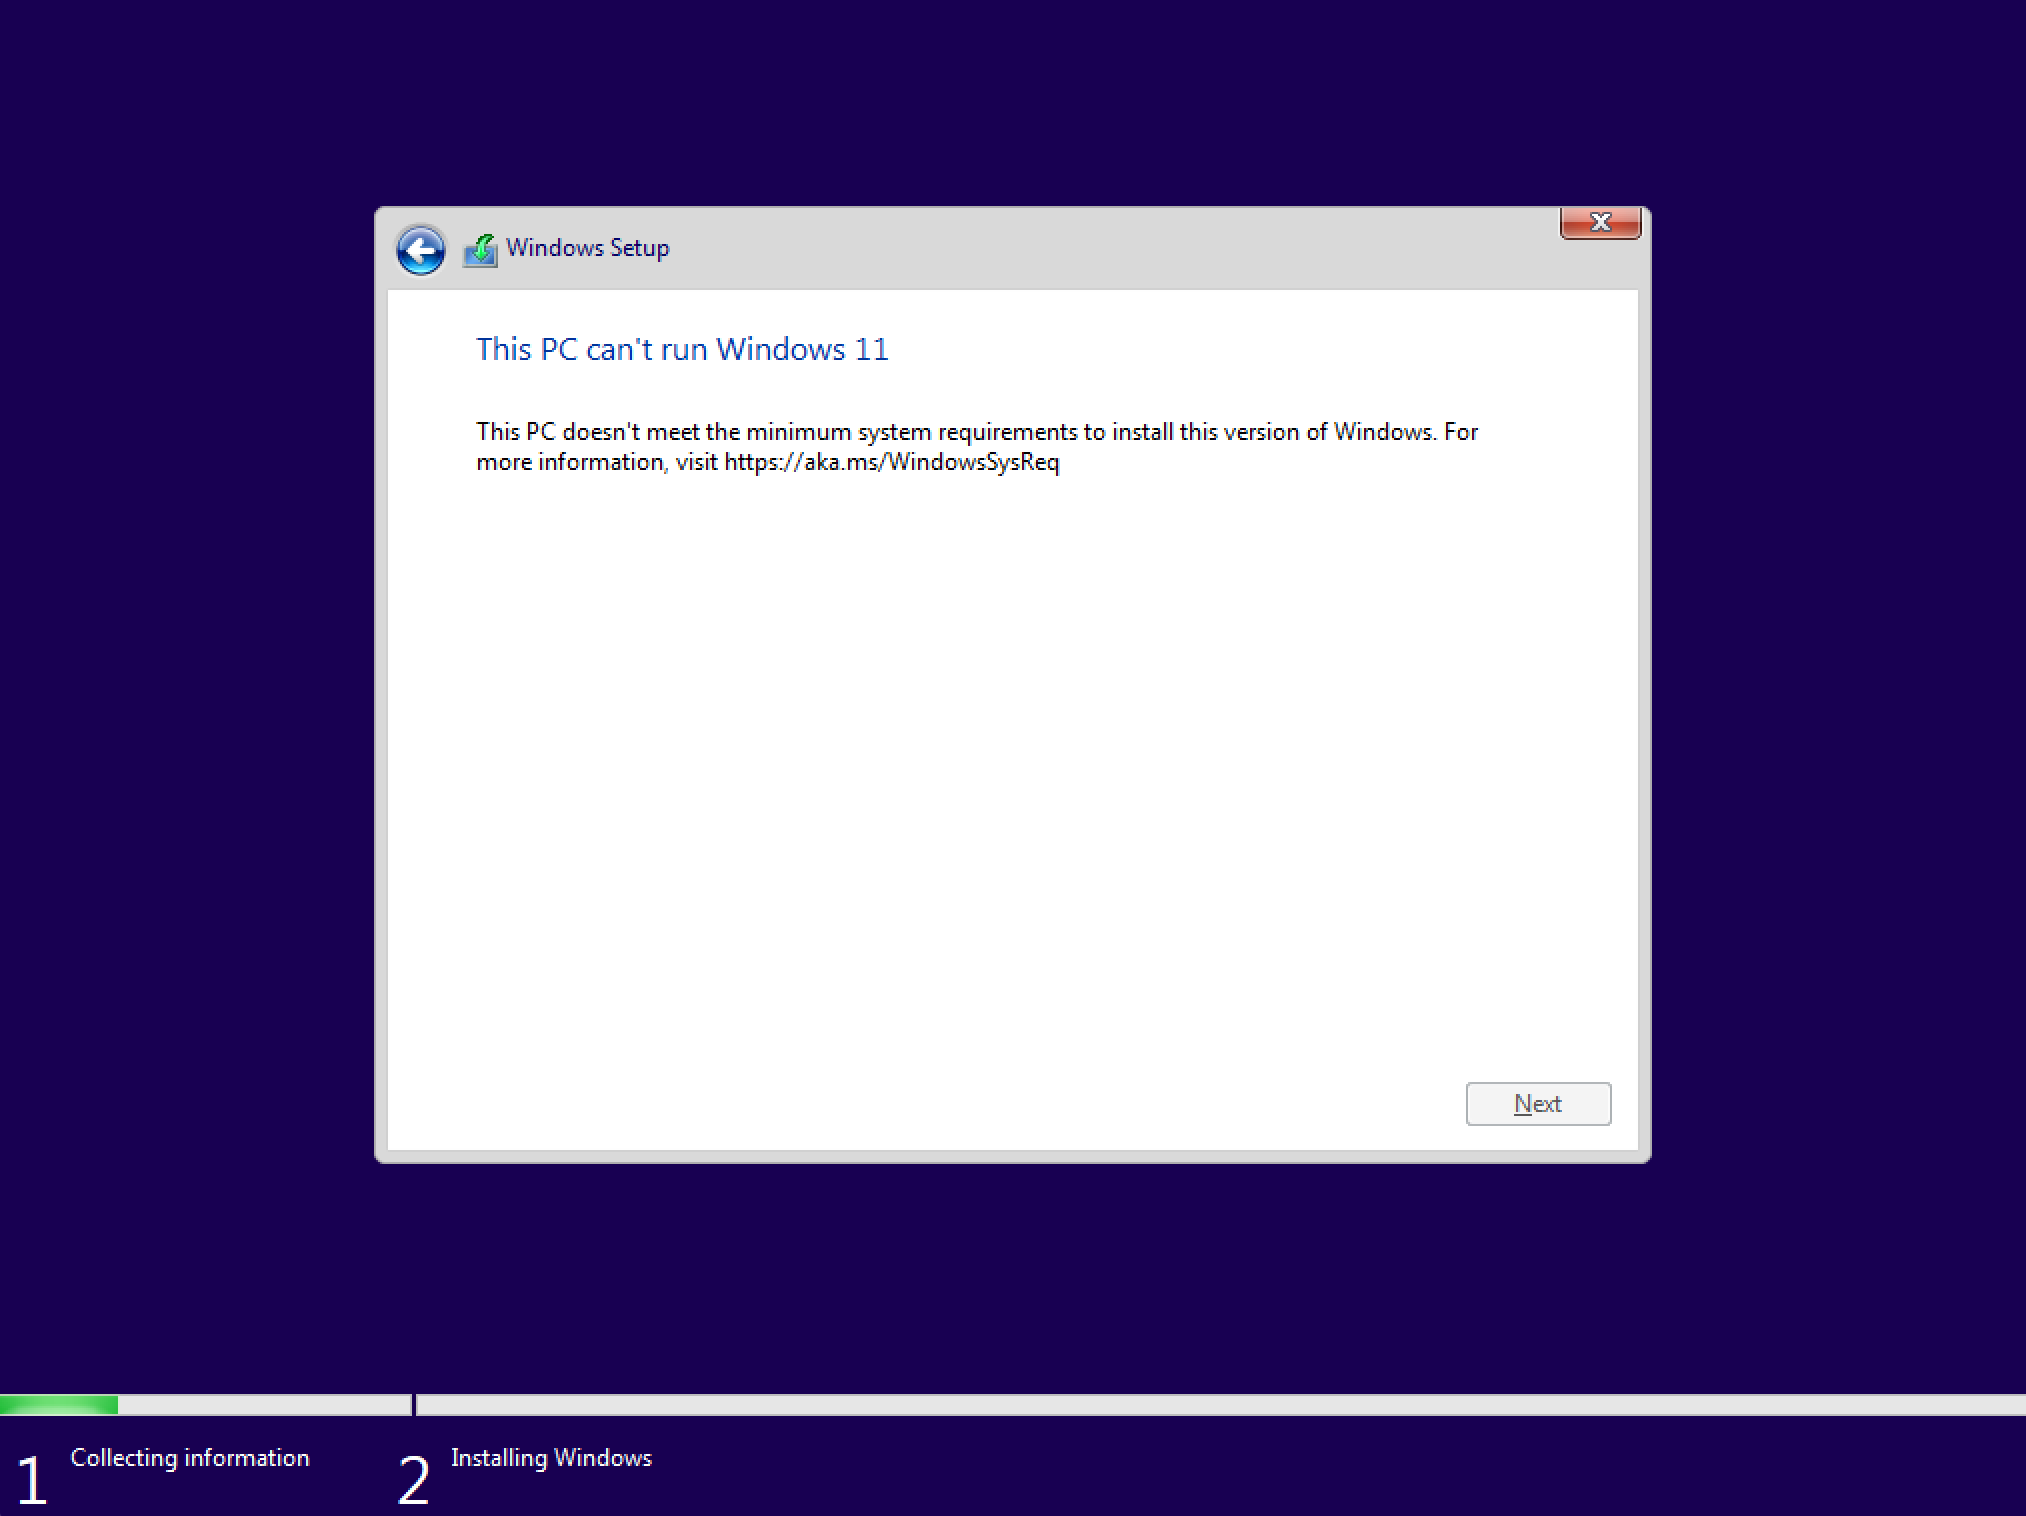 How to install Windows 11 from a USB